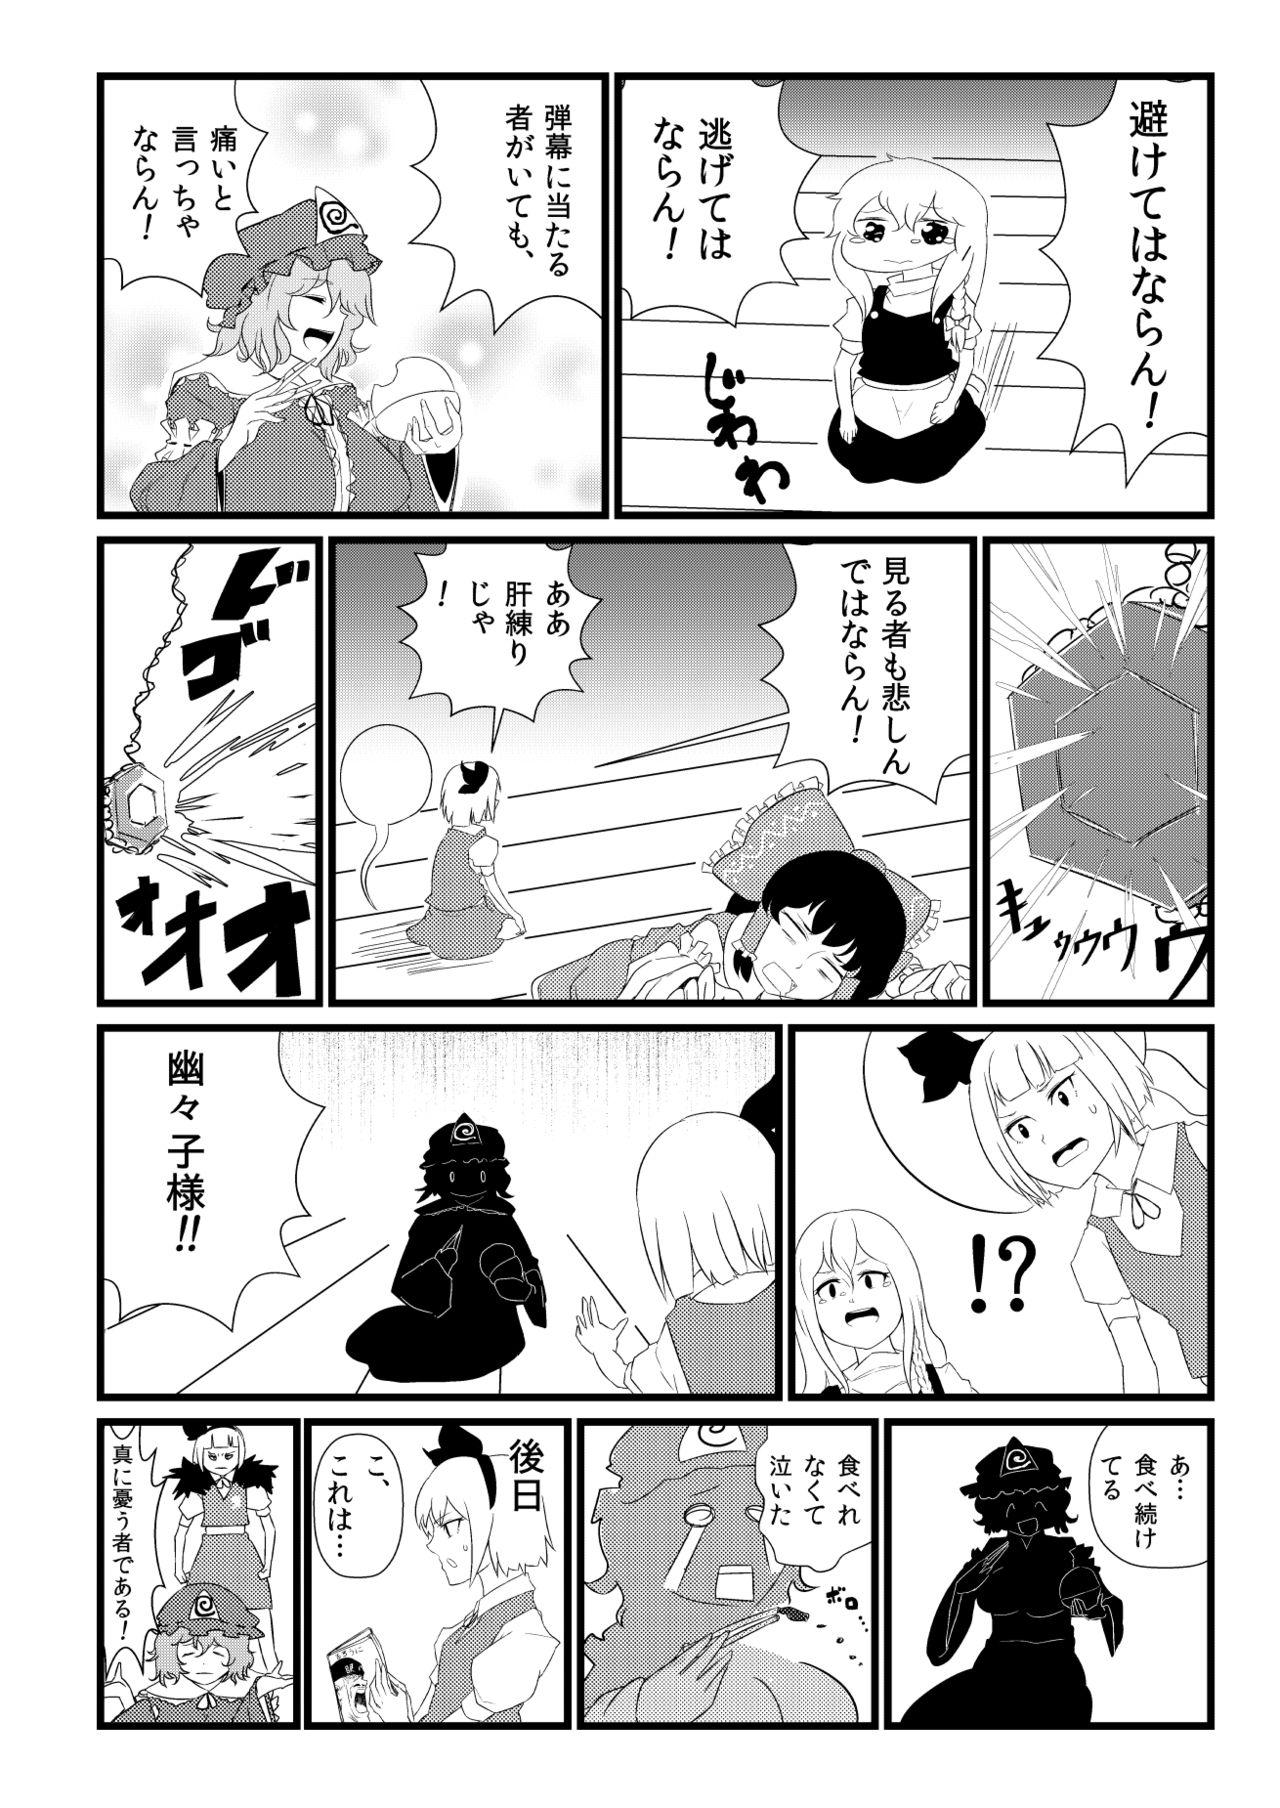 Women Sucking 東方板としあき合同誌5 - Touhou project Casada - Page 4